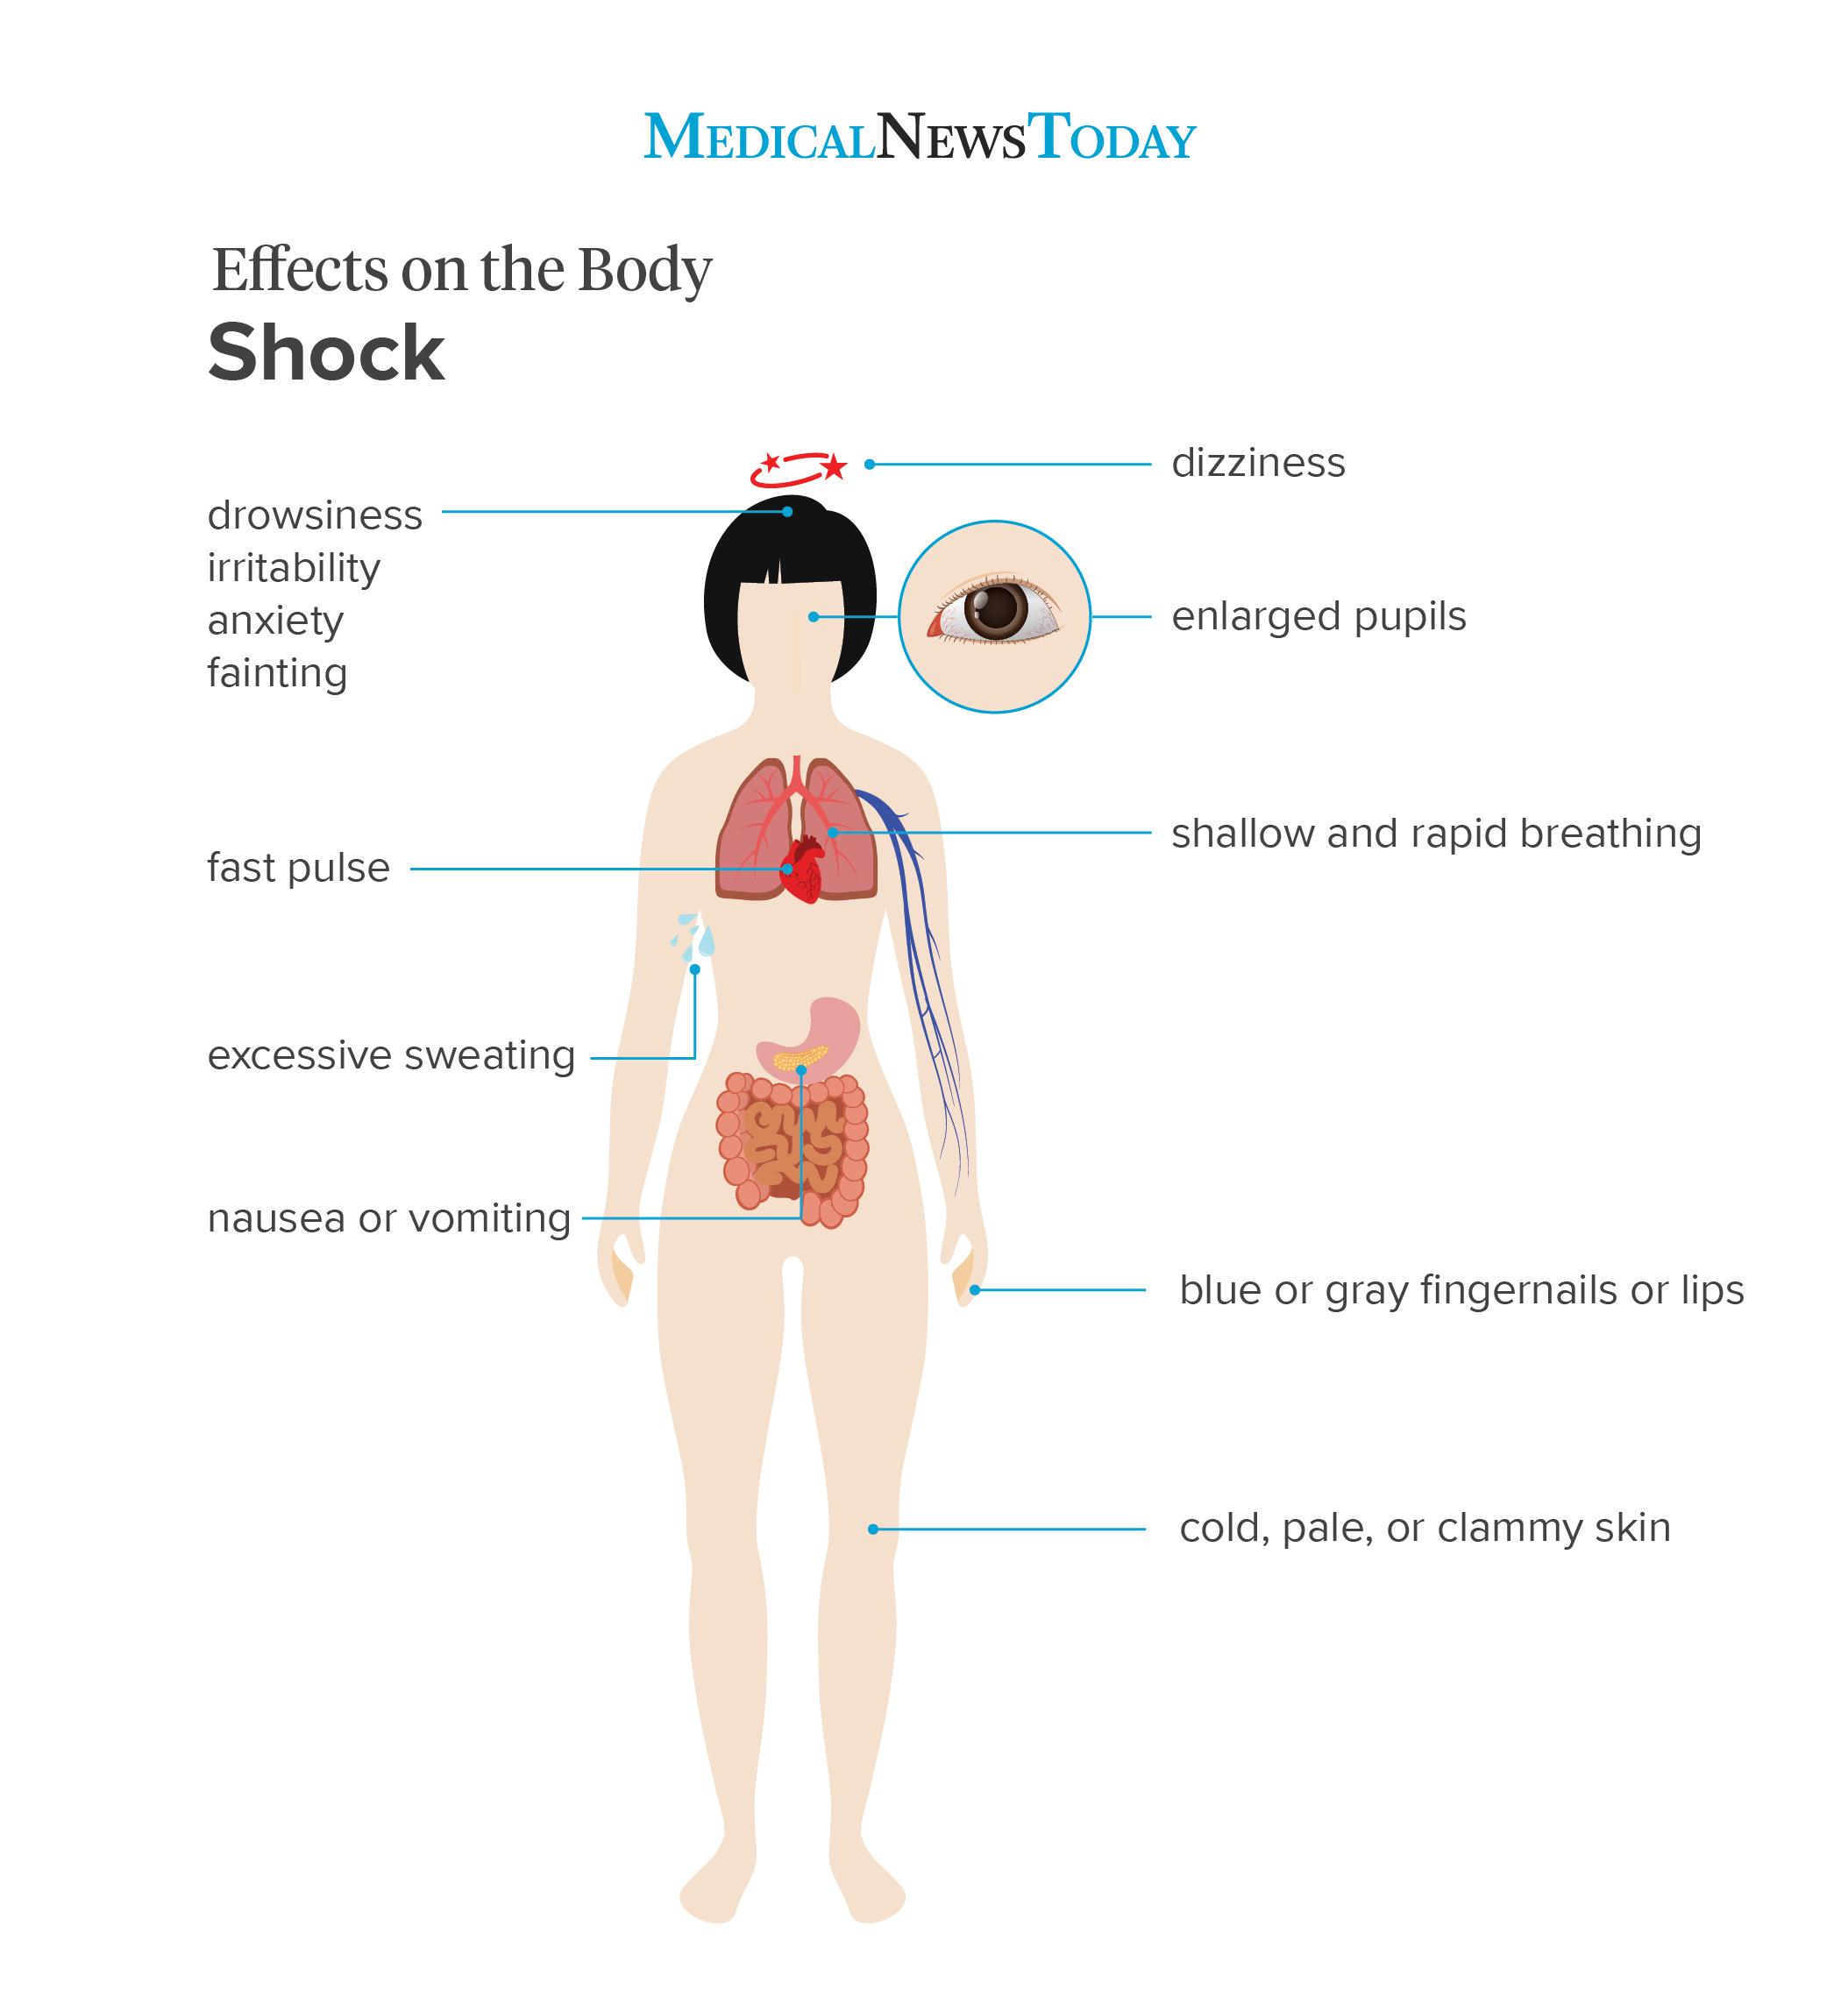 Shock: Signs, symptoms, and what to do